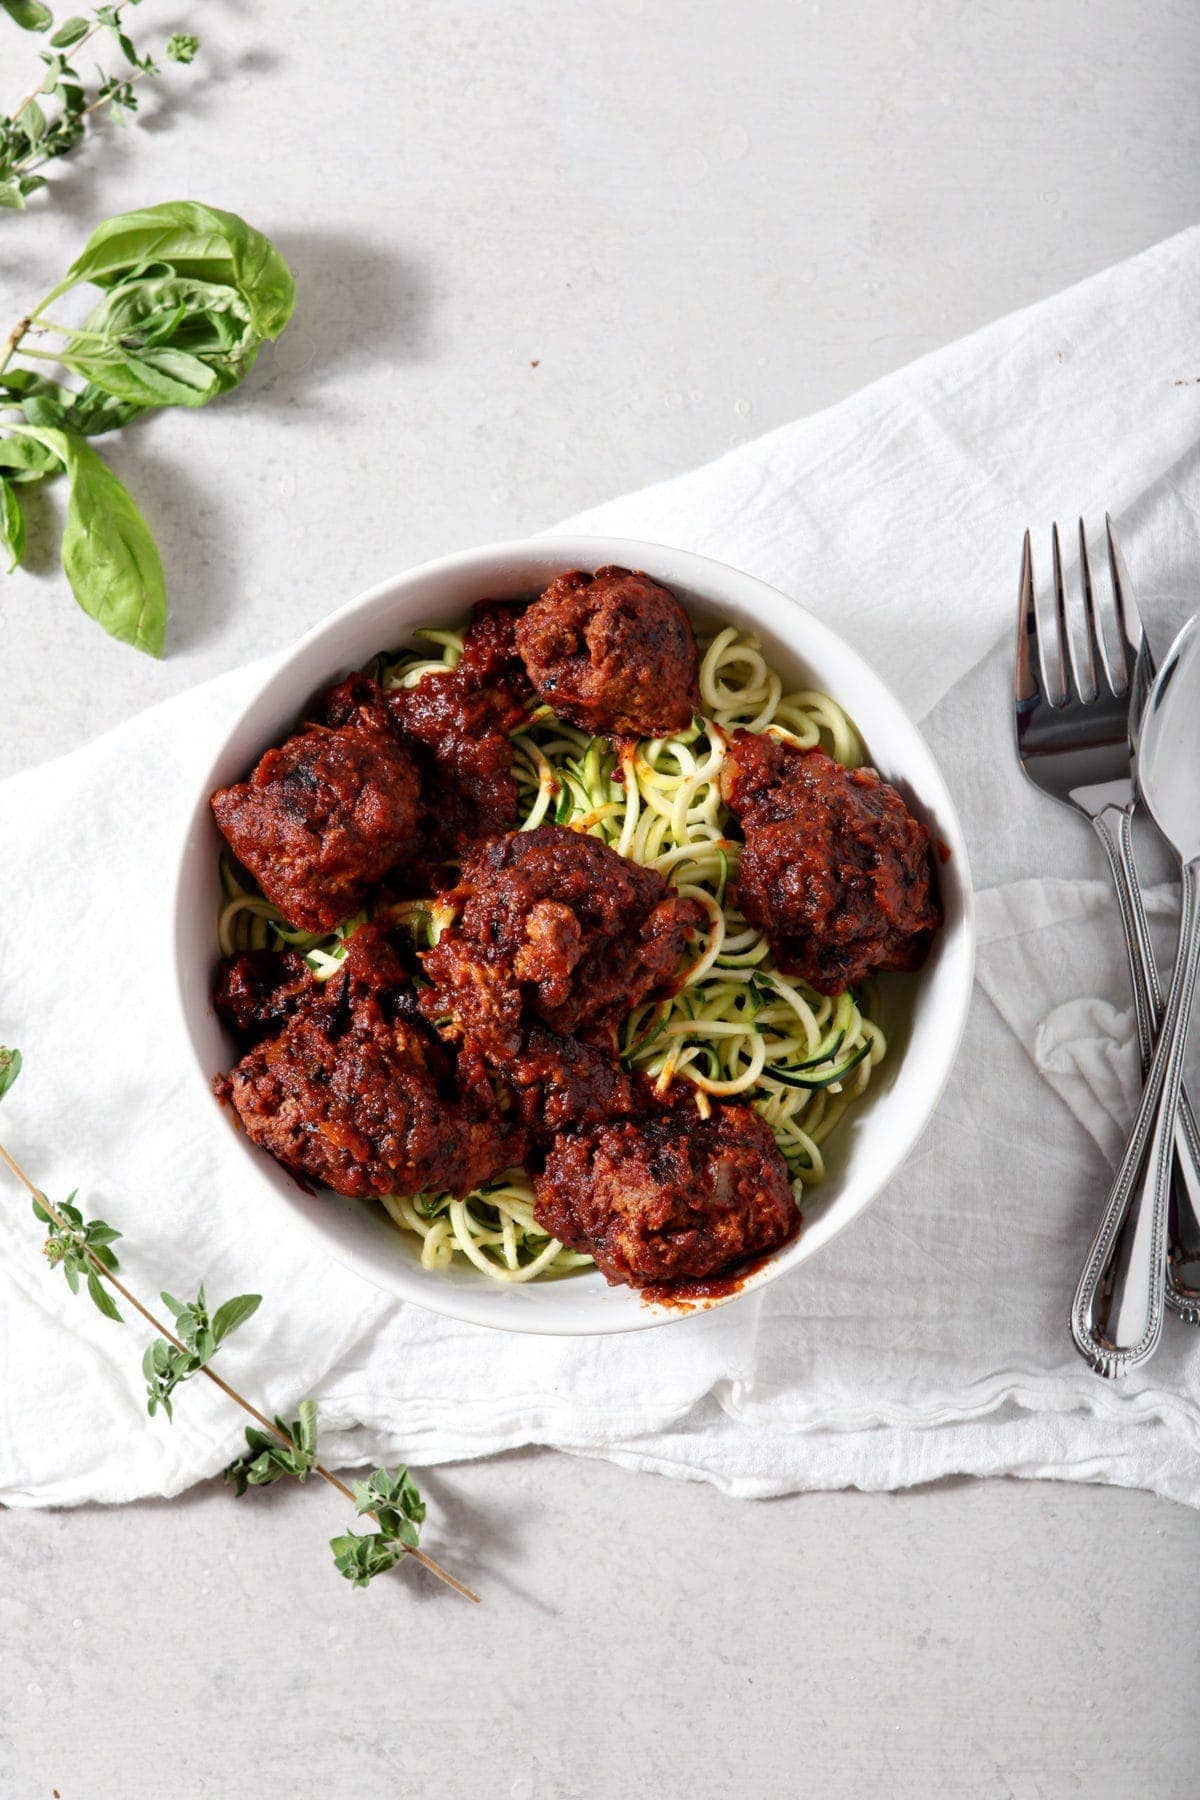 Whole30 Spaghetti and Meatballs served over zucchini noodles in a white bowl on a white tablecloth.